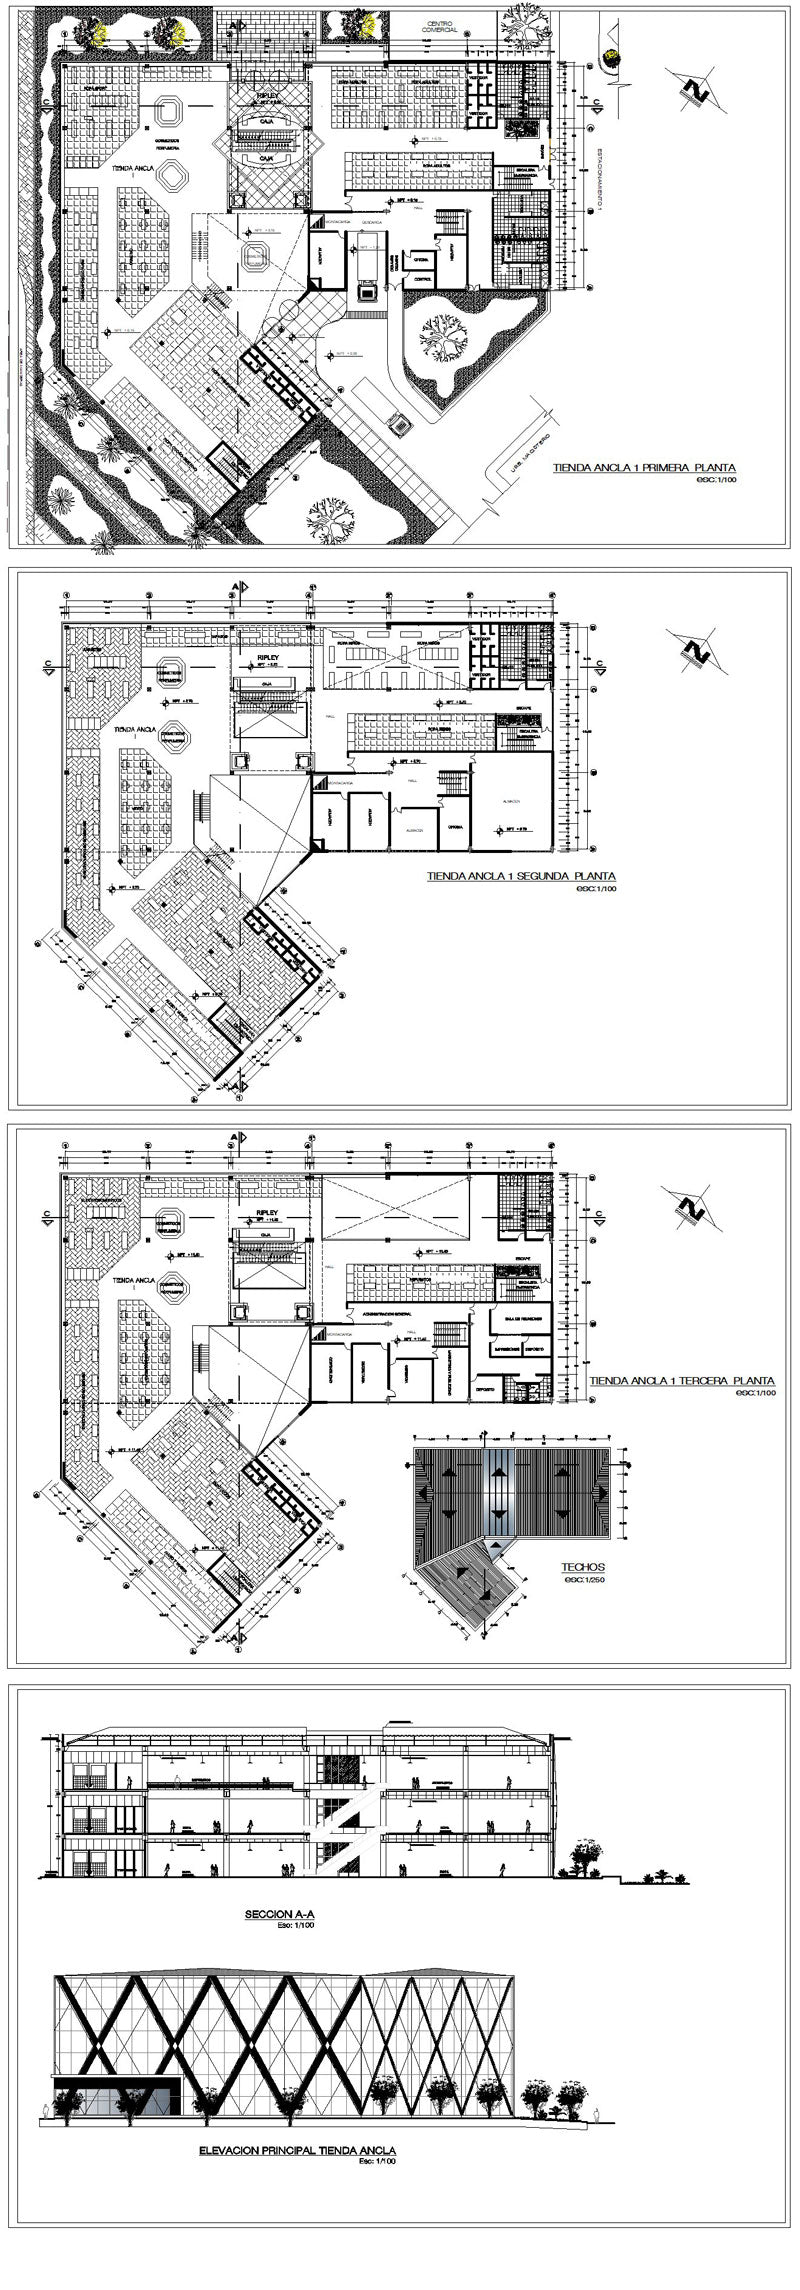 ★【Shopping Centers, Department Stores,Boutiques CAD Design Drawings V.2】@Boutiques, clothing stores, women's wear, men's wear, store design-Autocad Blocks,Drawings,CAD Details,Elevation